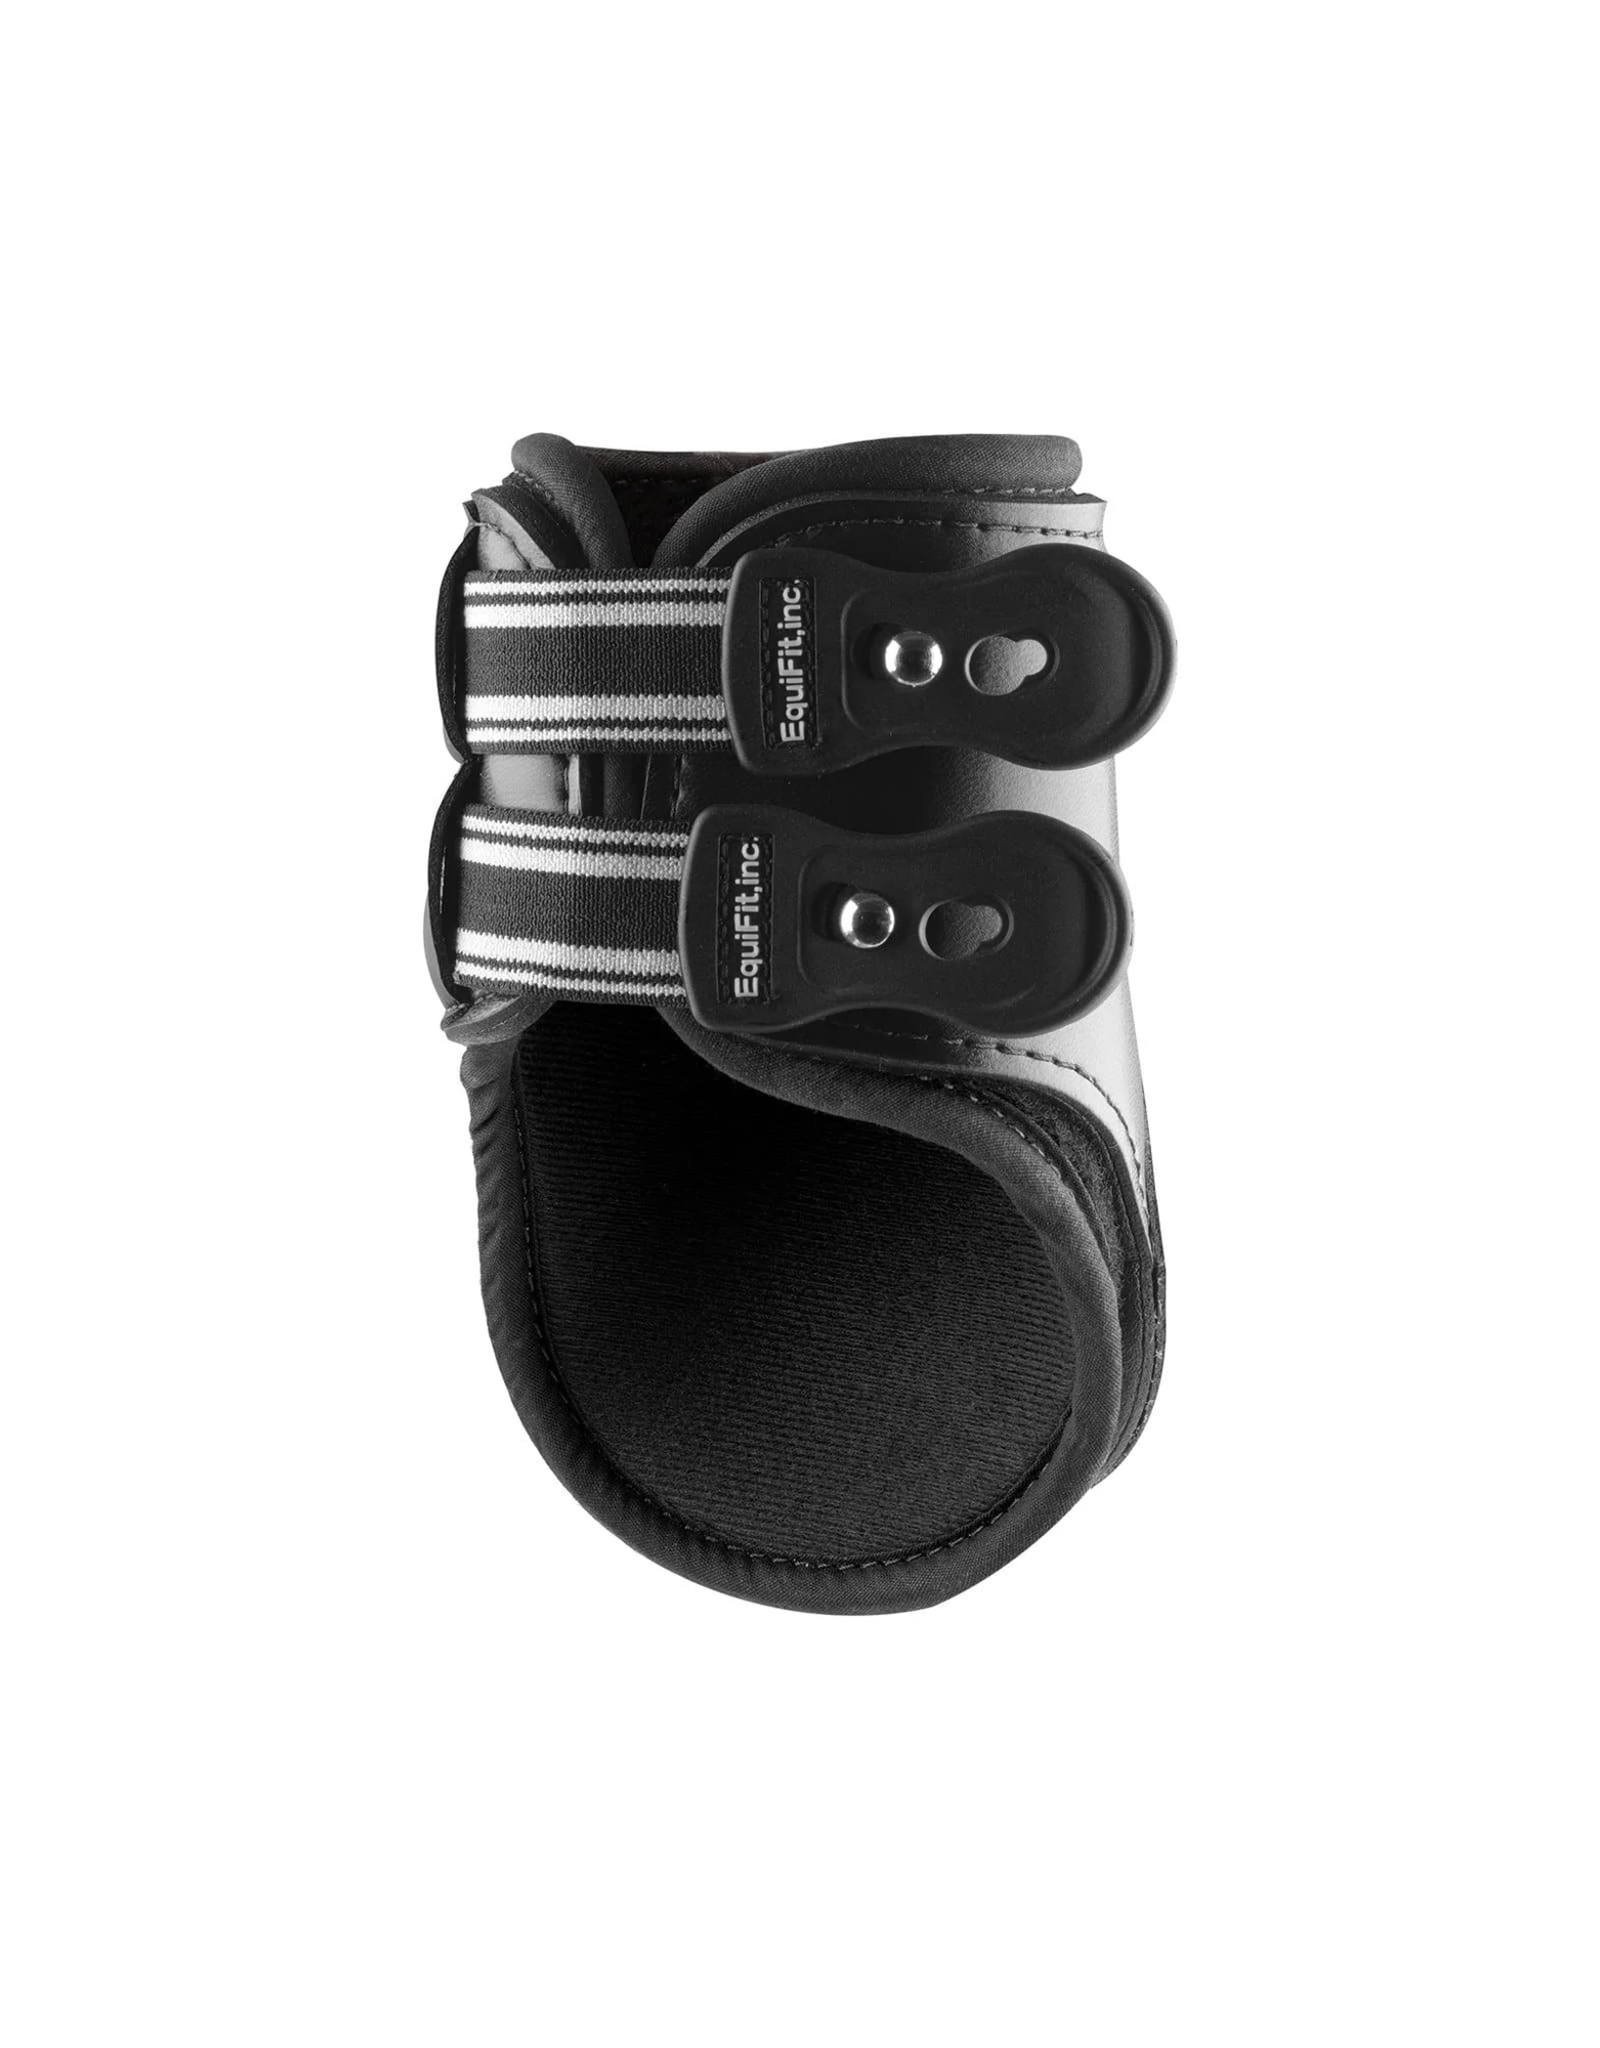 EQUIFIT EXP3 HIND BOOTS